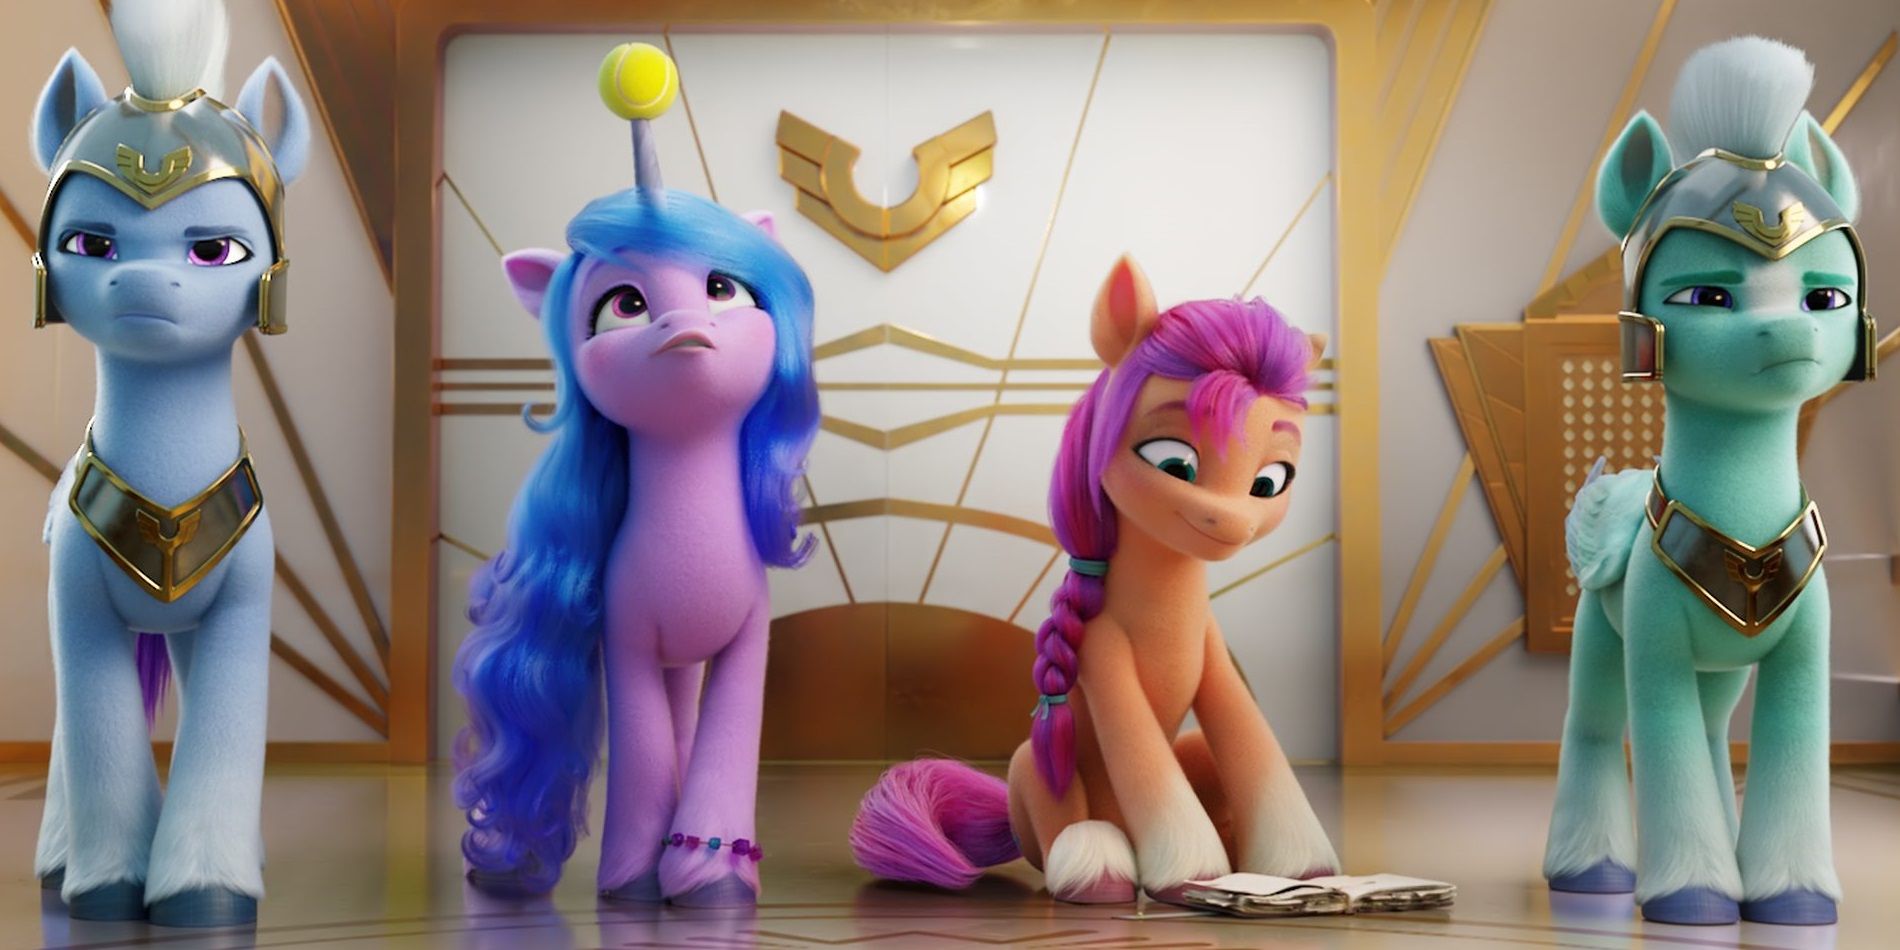 My Little Pony is getting a CG film and series at Netflix